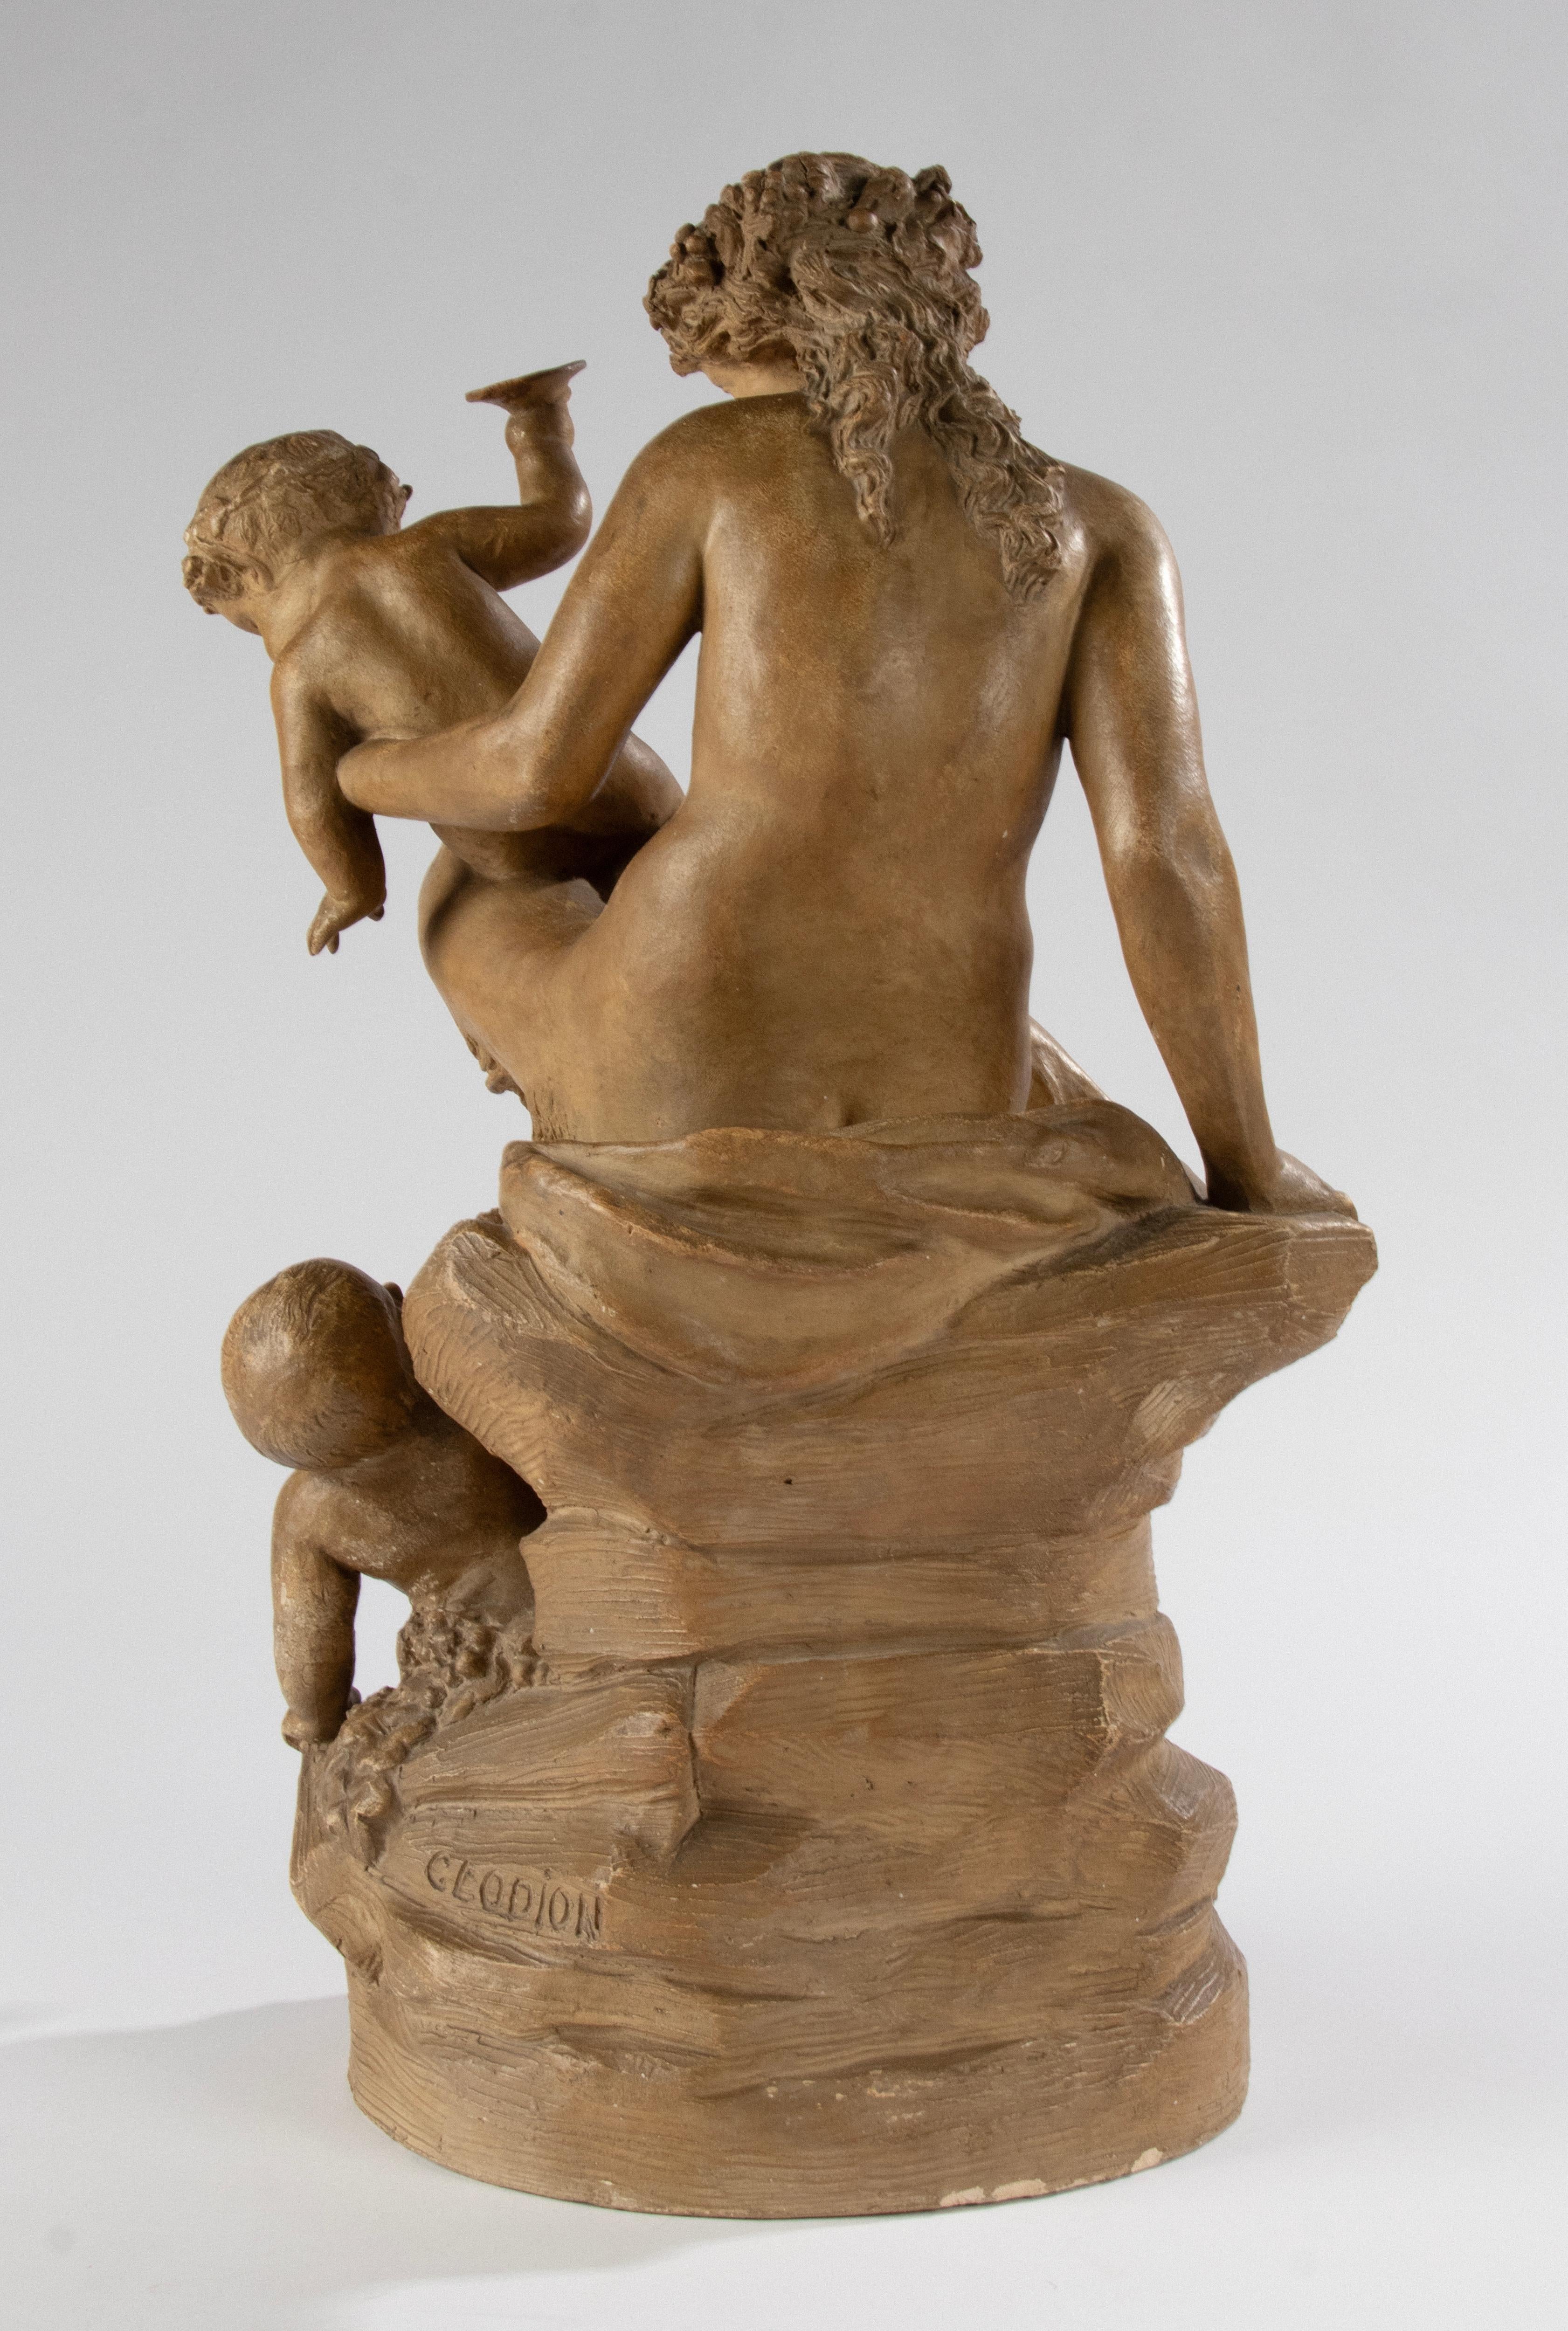 Antique Terracotta Bacchanale Sculpture with Faun and Putti - After Clodion For Sale 6